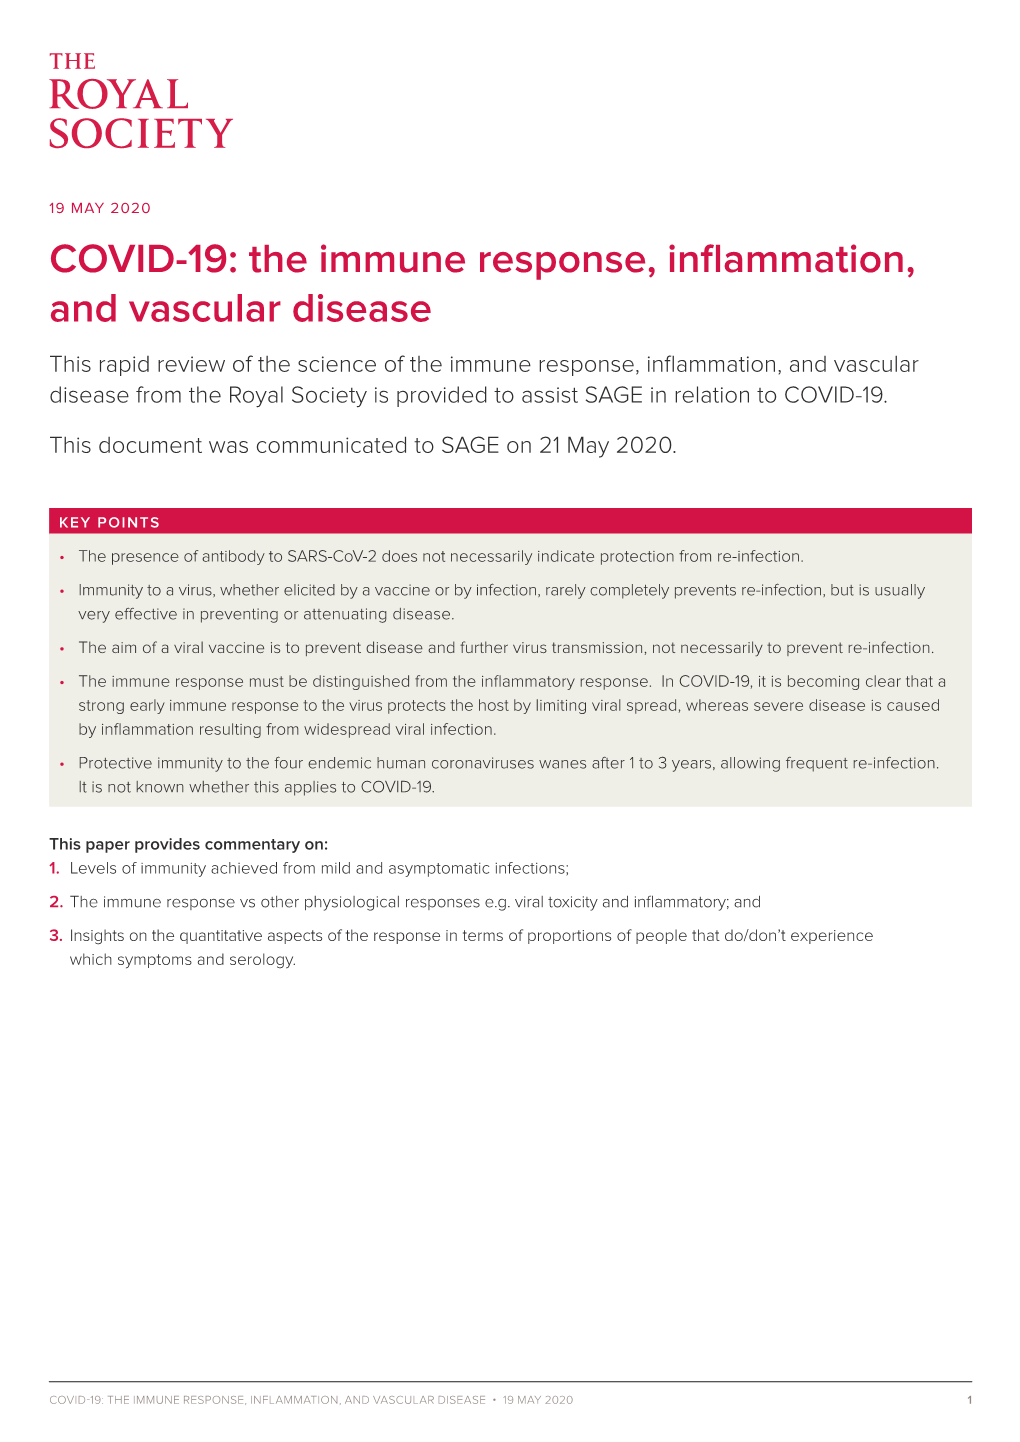 The Immune Response, Inflammation, and Vascular Disease